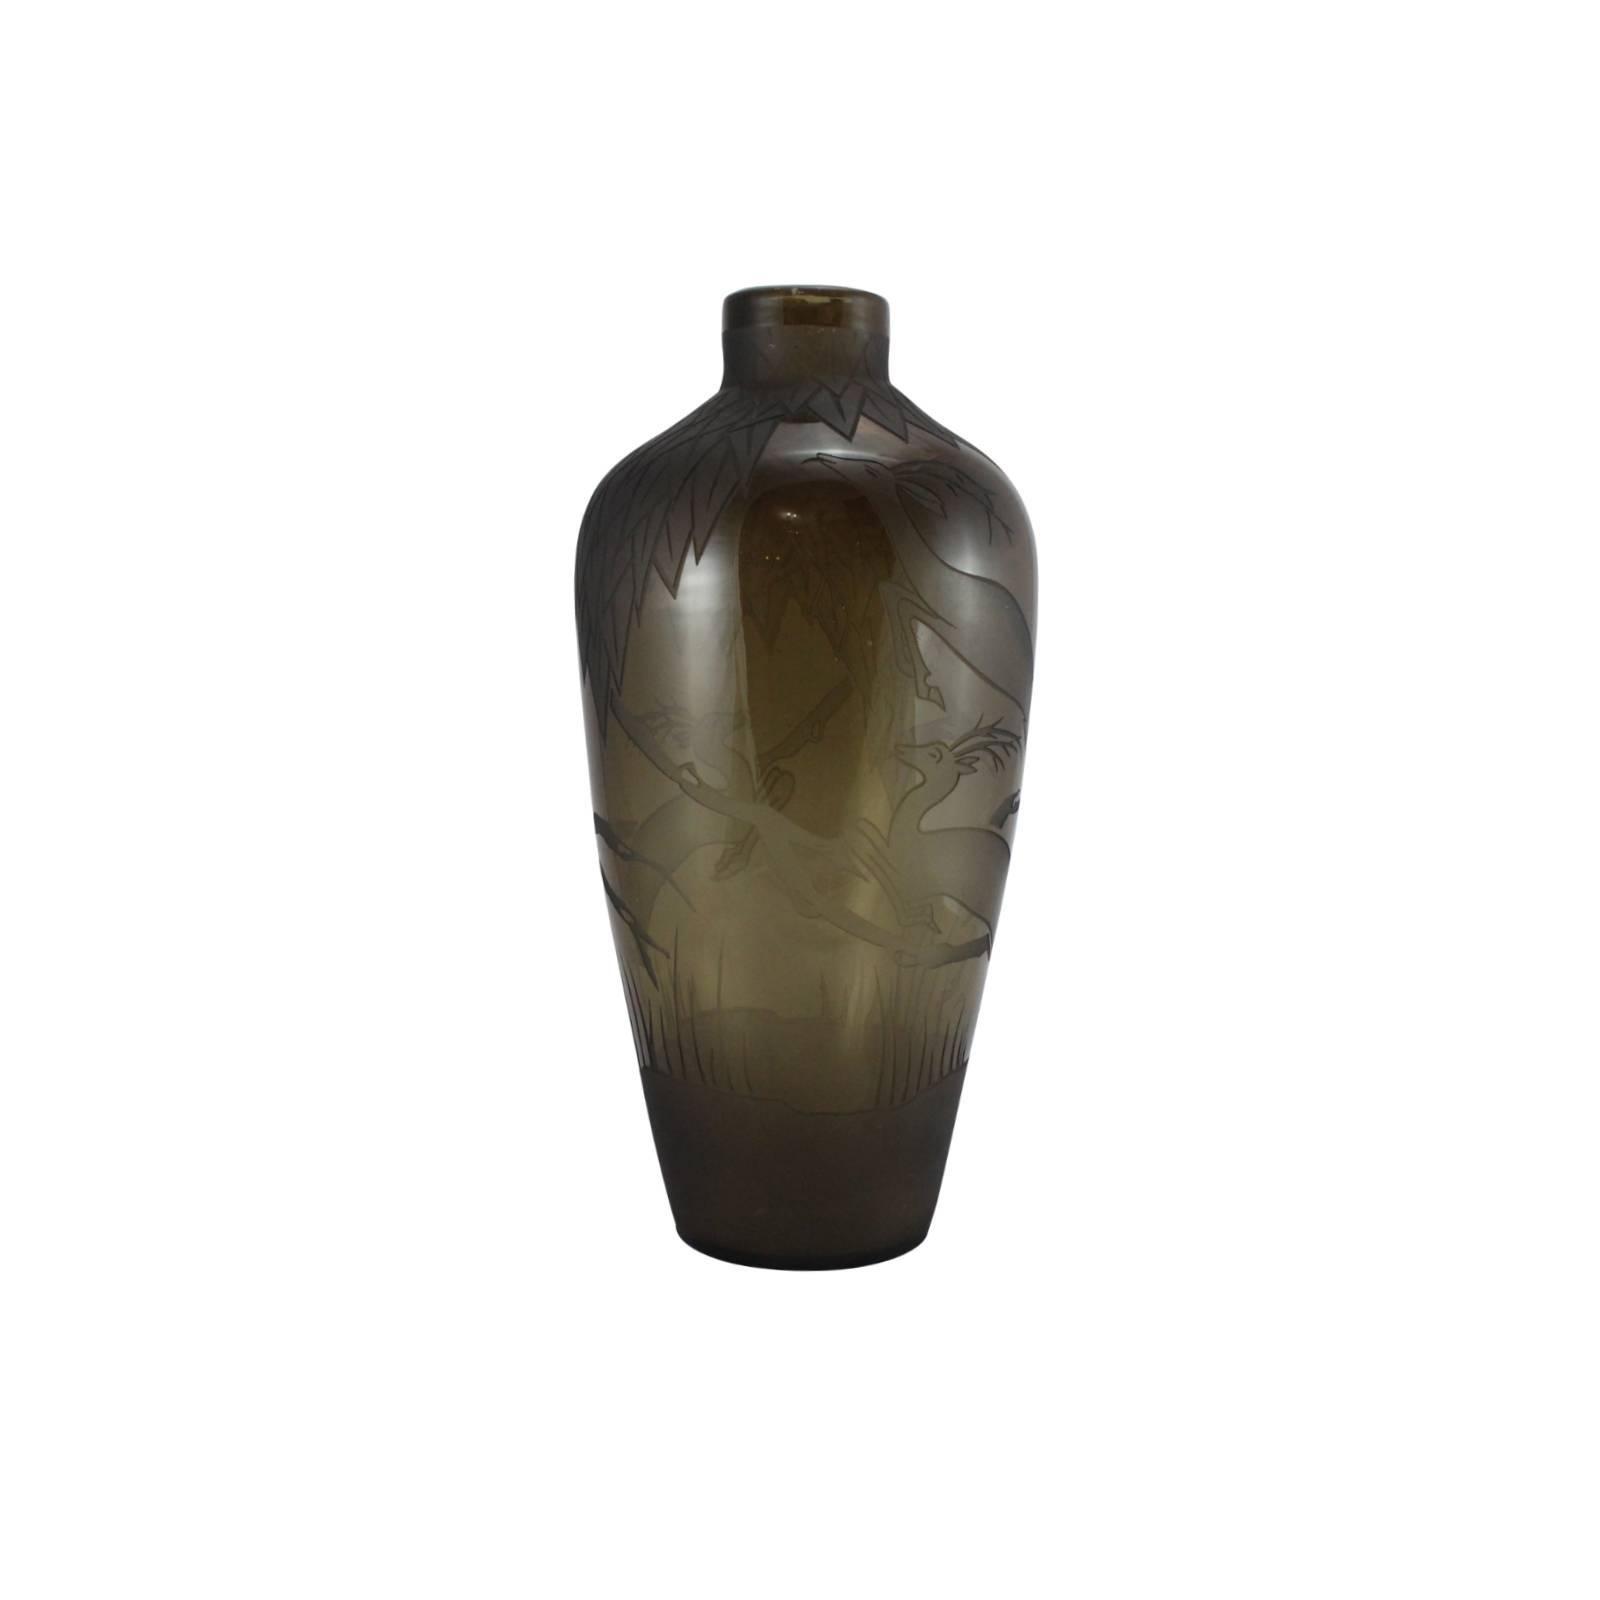 French Verart Paris Art Deco Glass Vase with Acid Etched Leaves and Stags For Sale